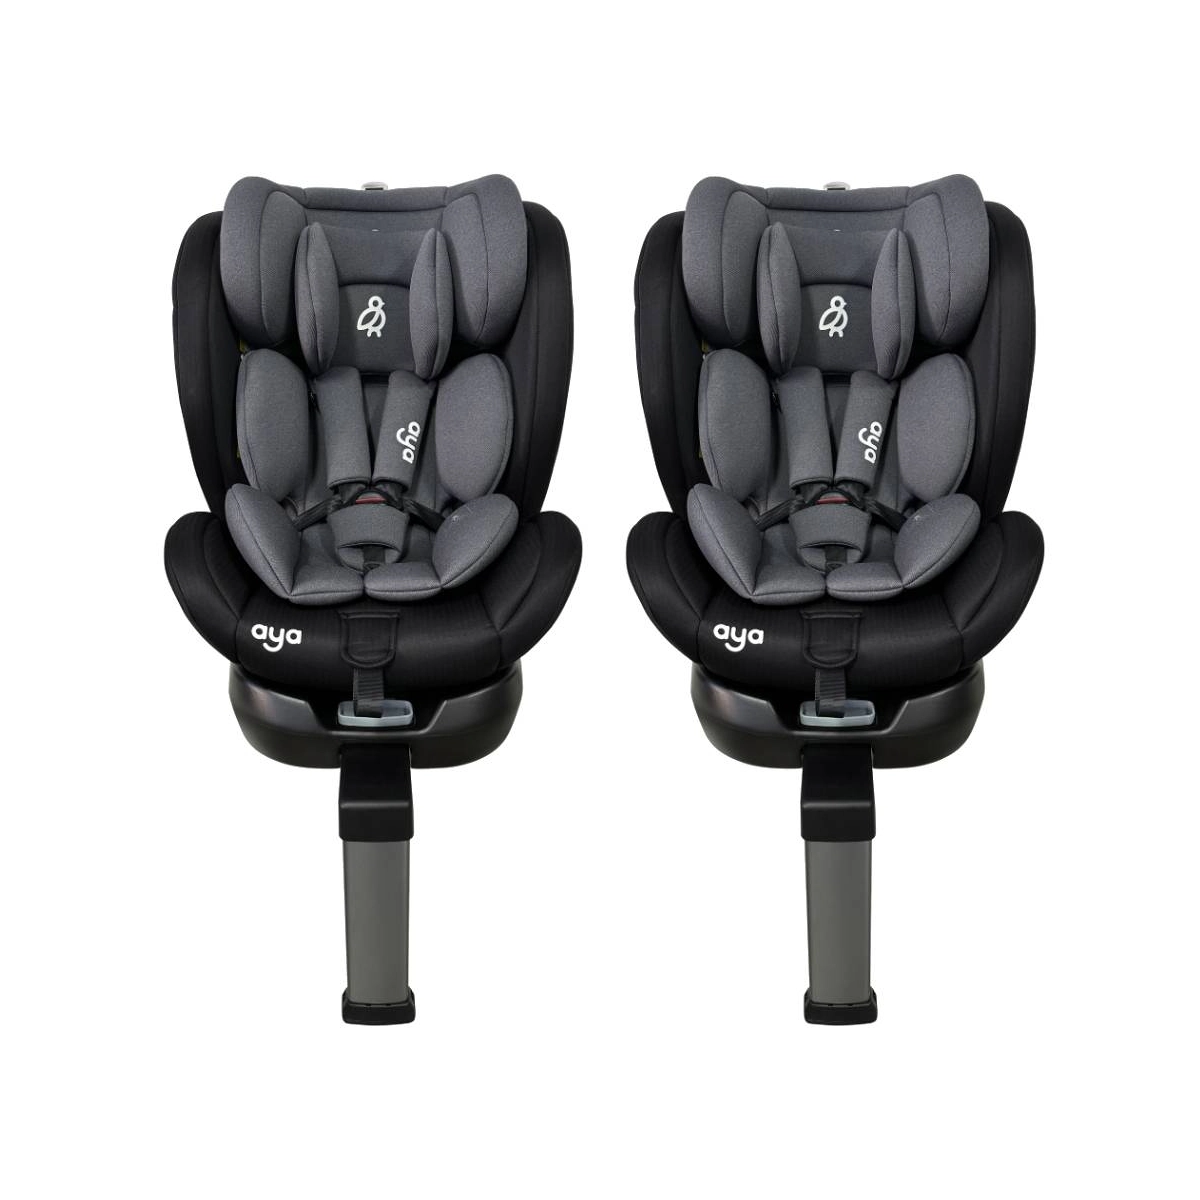 Aya EasySpin 360 i-Size All Stage Car Seat (Pack of 2)